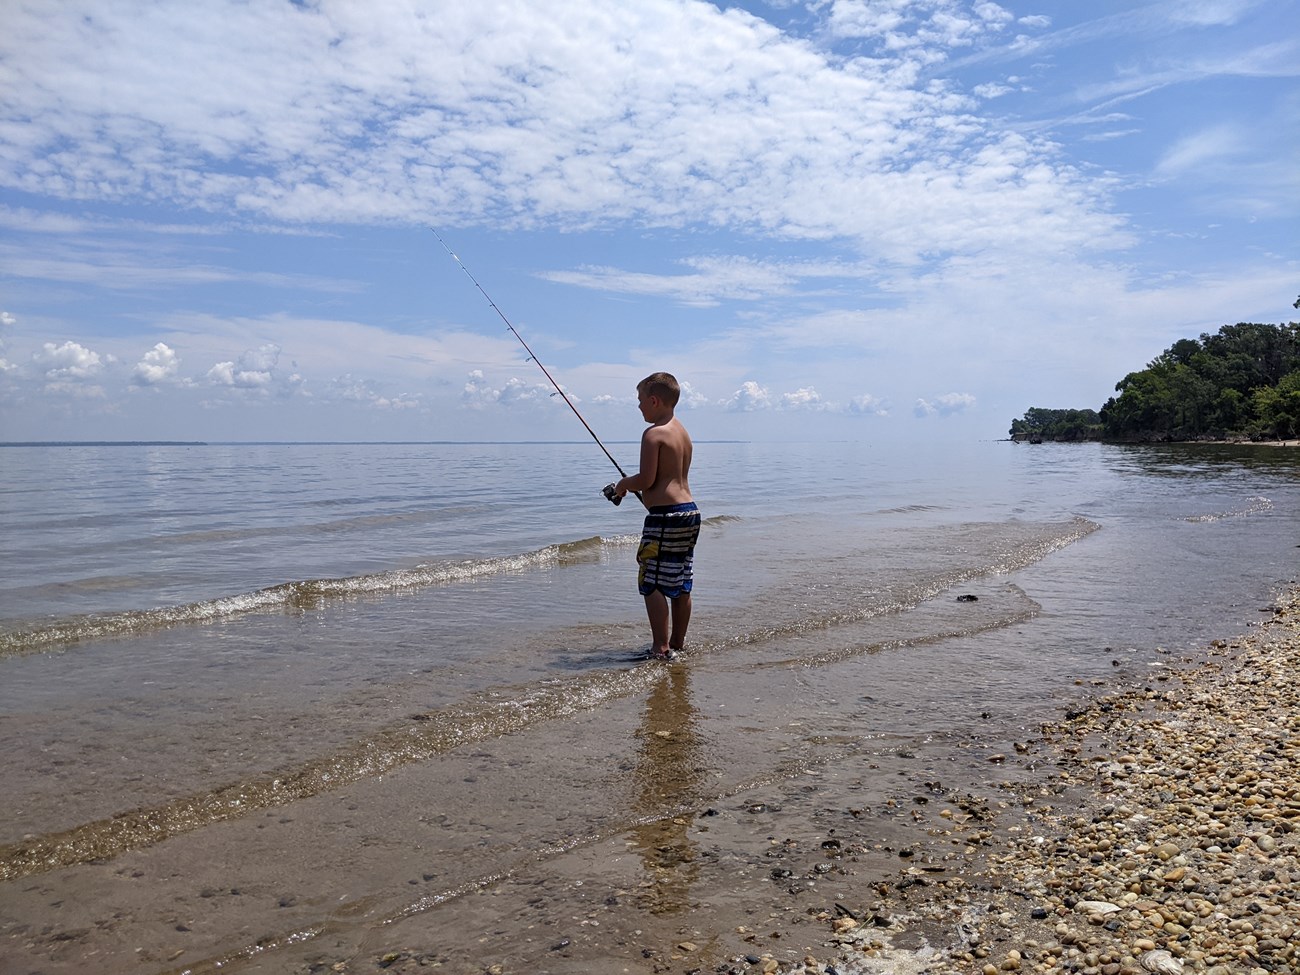 Youth fishing on sandy beach on the Potomac River